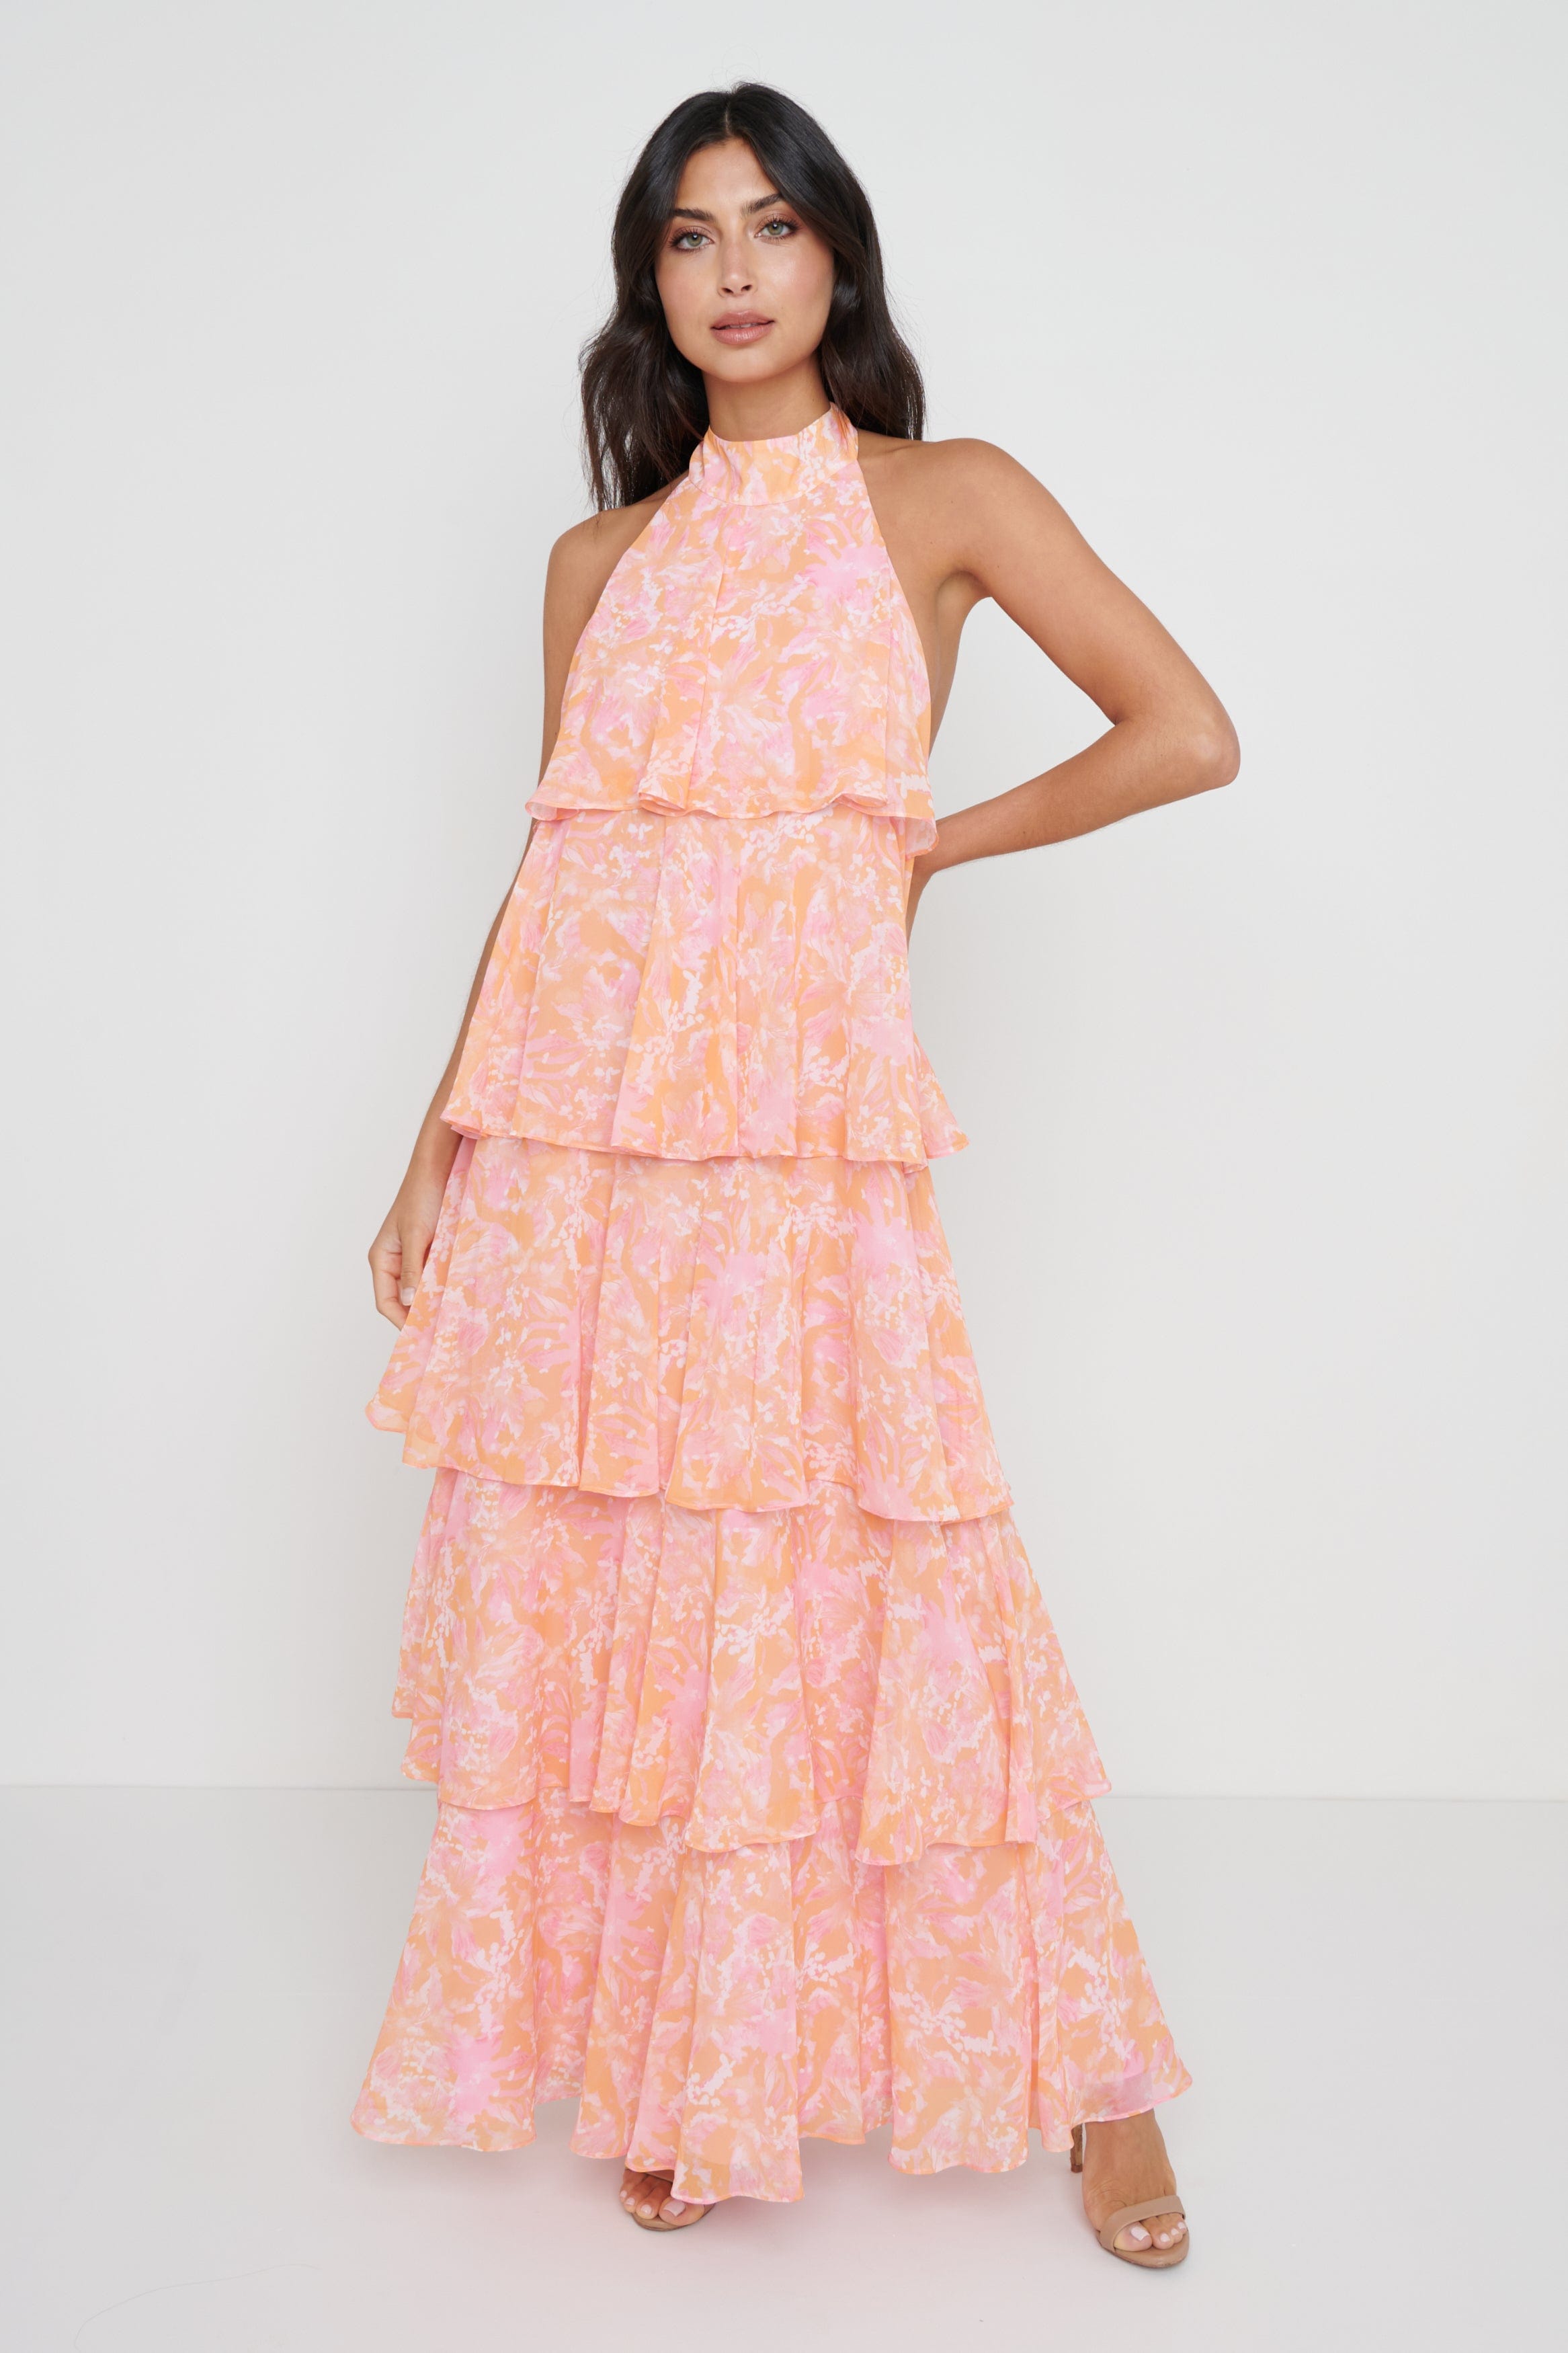 Thea Halter Neck Ruffle Dress - Pink and Orange Floral, 16